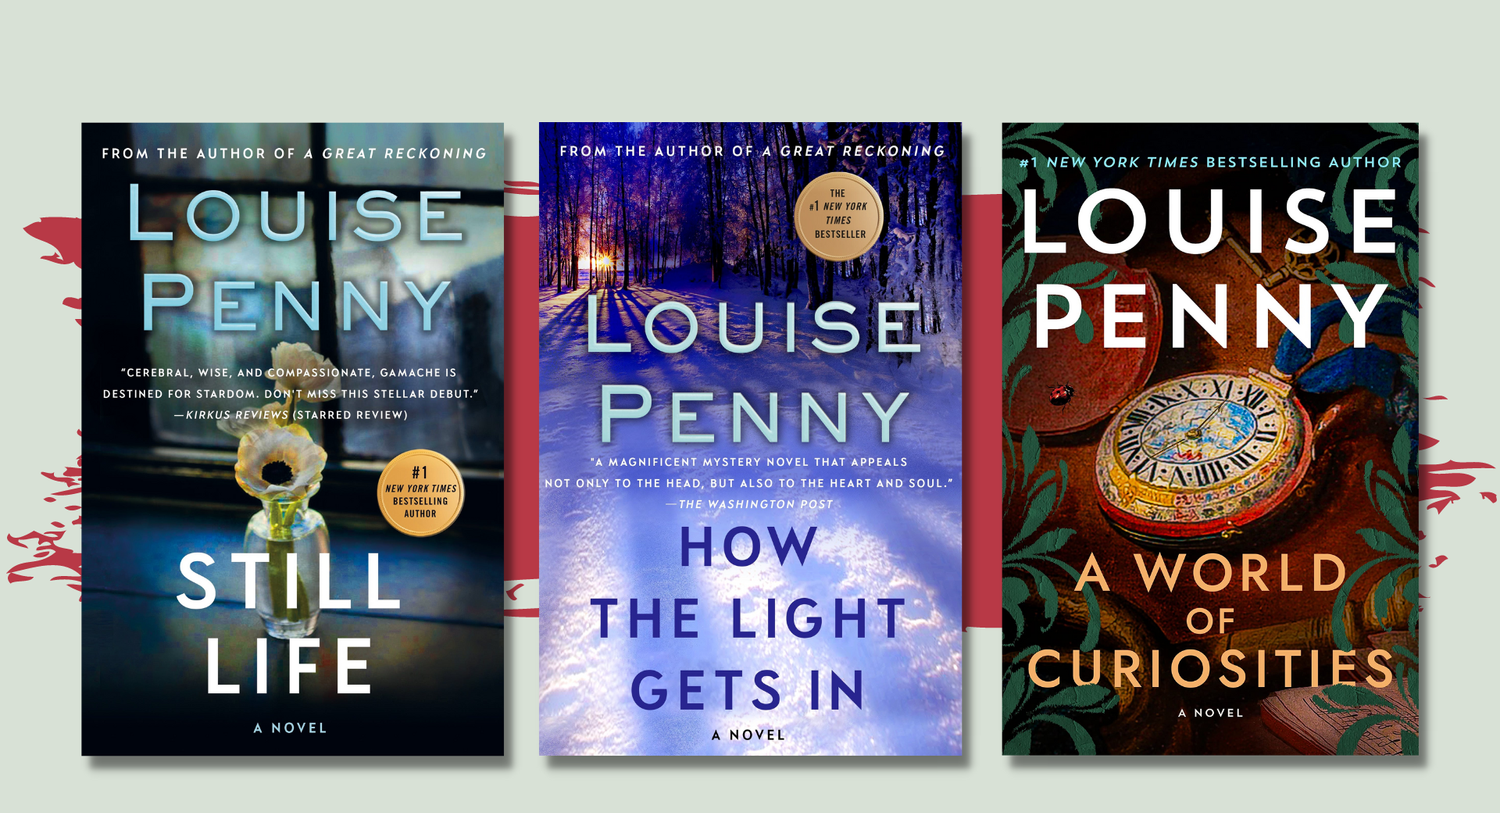 Book review: A World of Curiosities, by Louise Penny - The